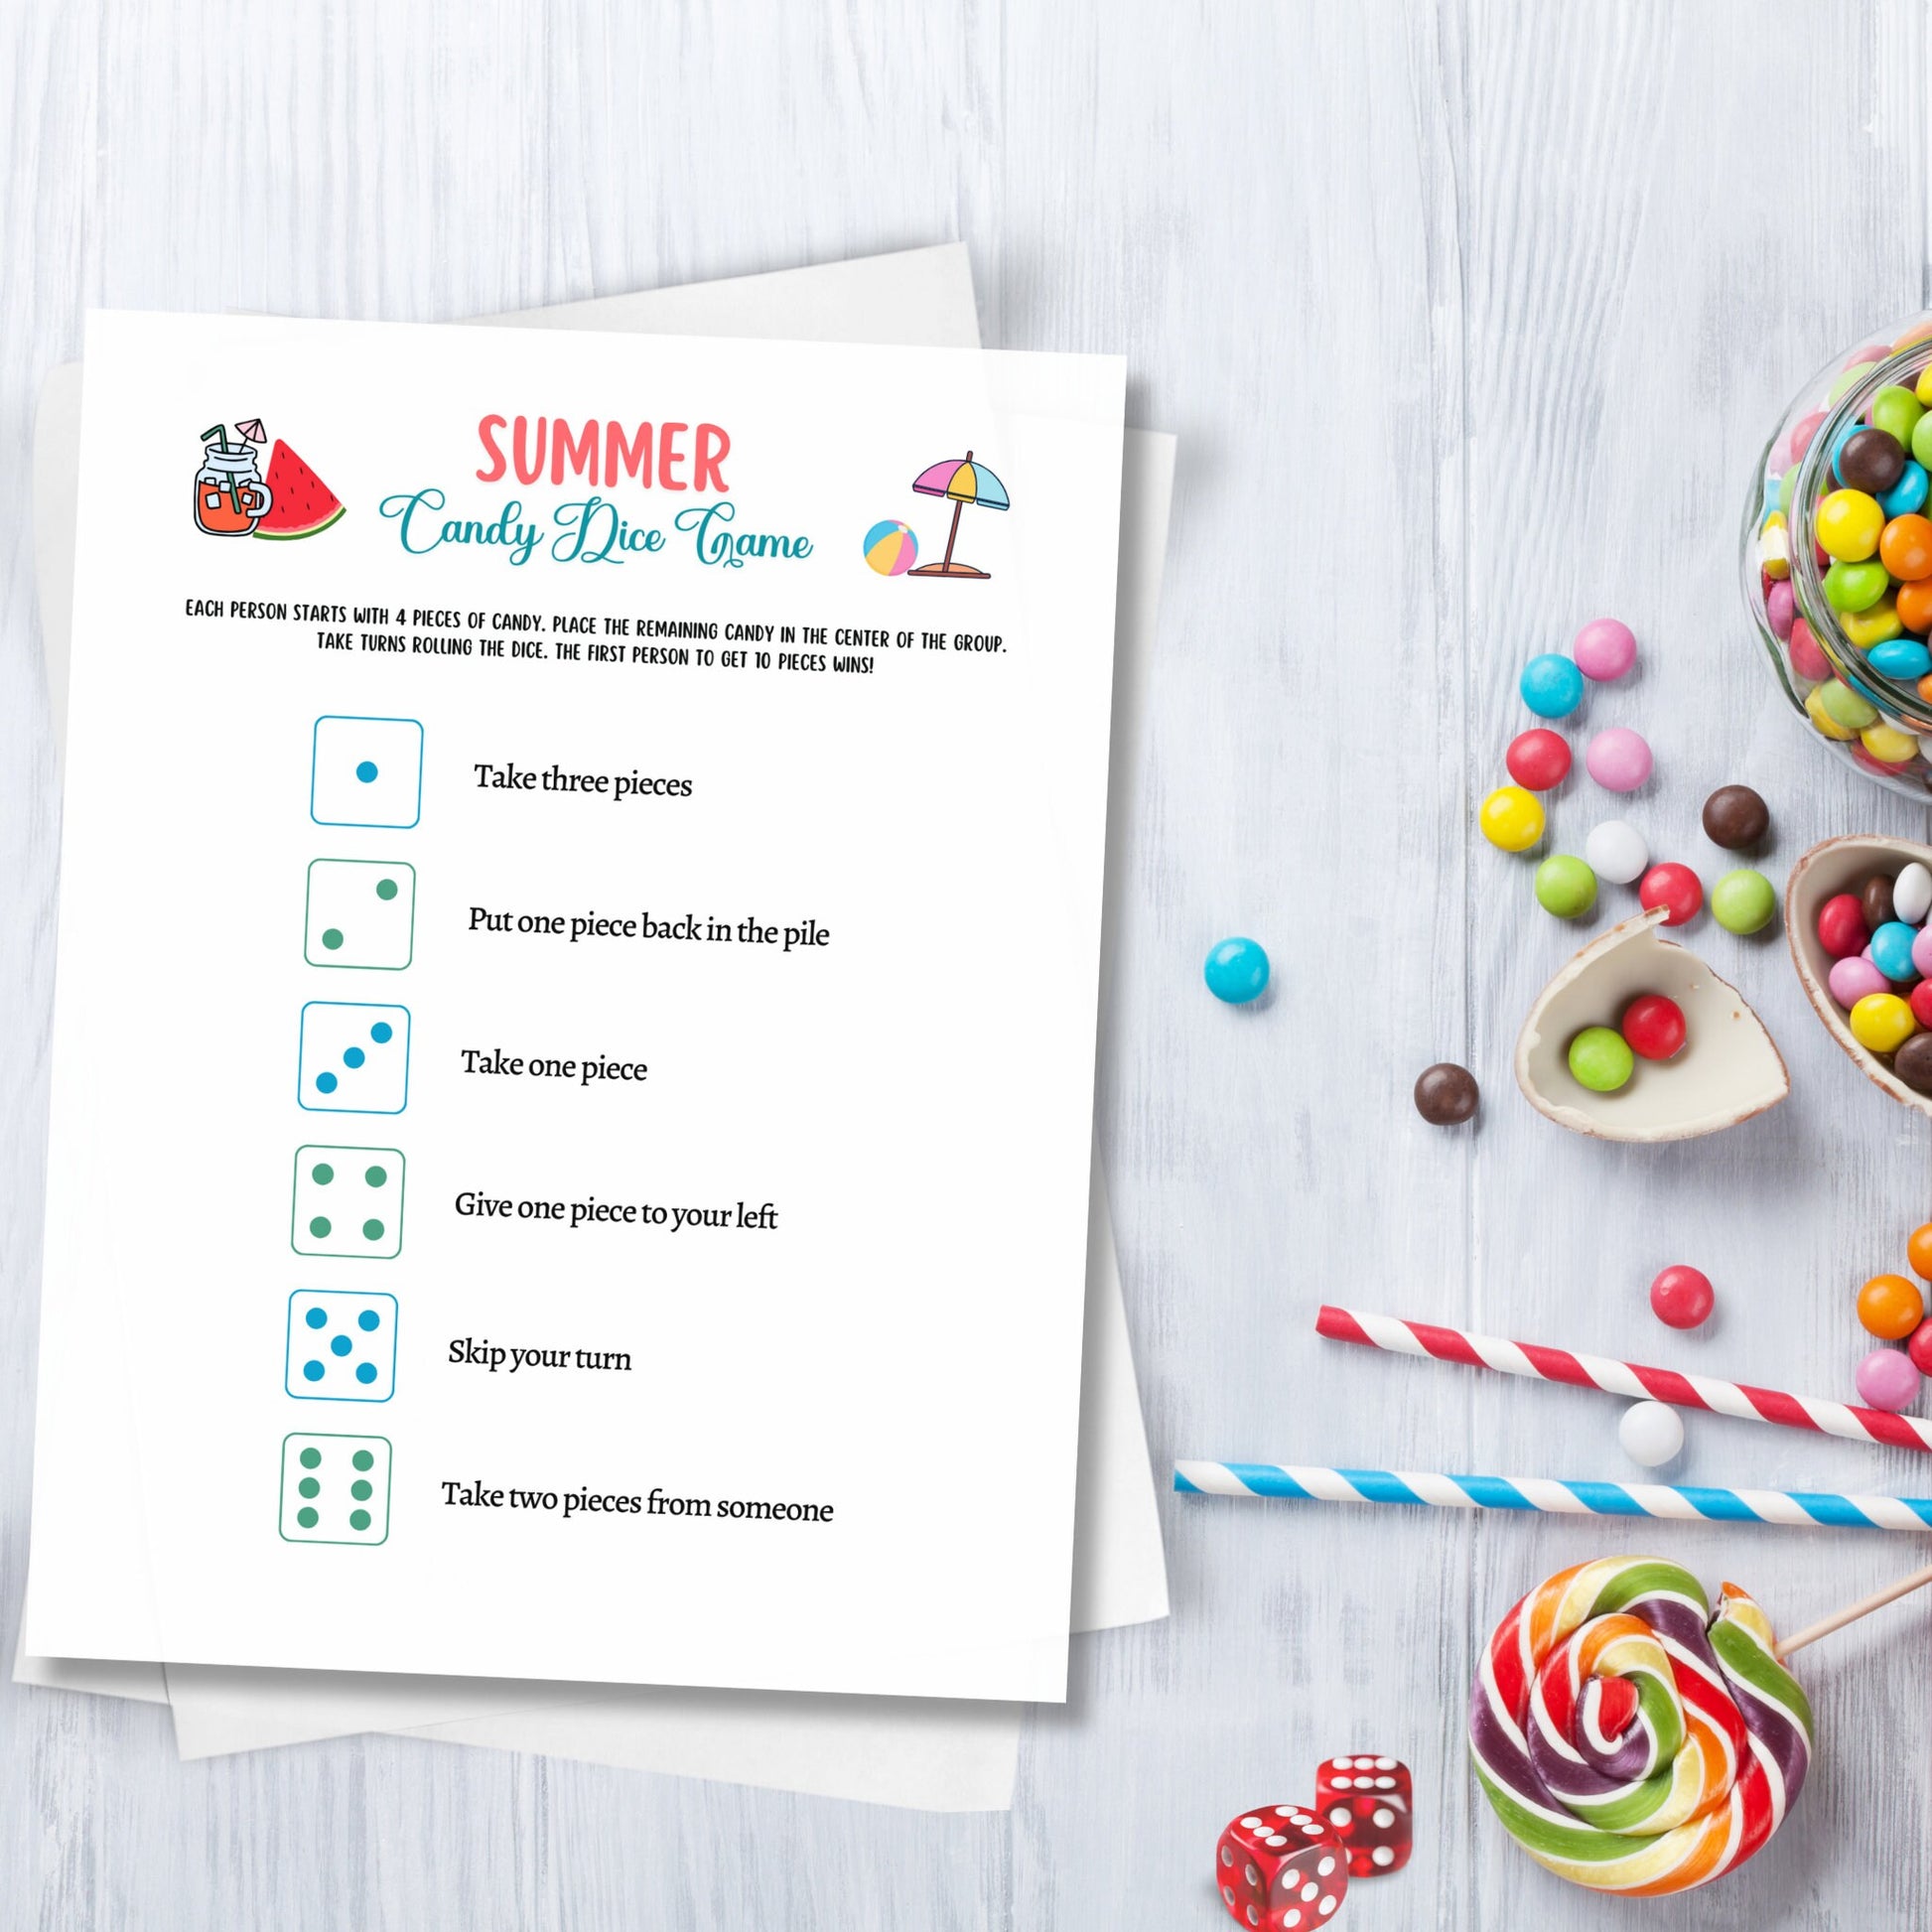 Summer Candy Dice Game Printable, Pool Party Games, Summer Camp Activity, Fun Beach Games Kids, Summer Break Vacation Idea, Road Trip Game